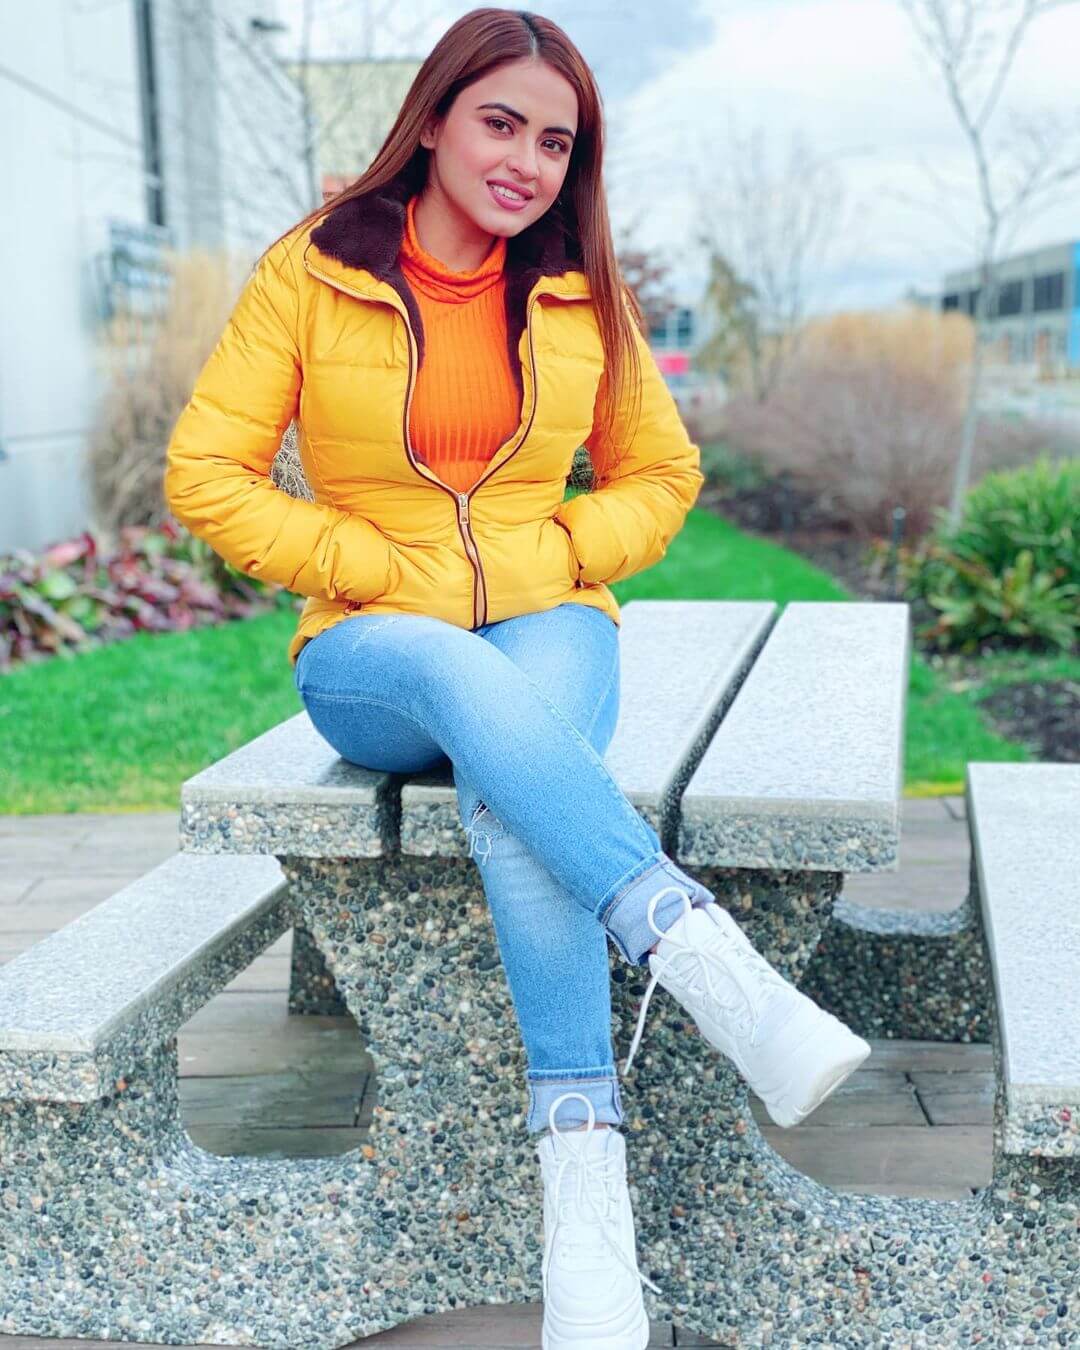 Simi Chahal Casual Look In Blue Denim Jeans With Yellow Jacket Outfit